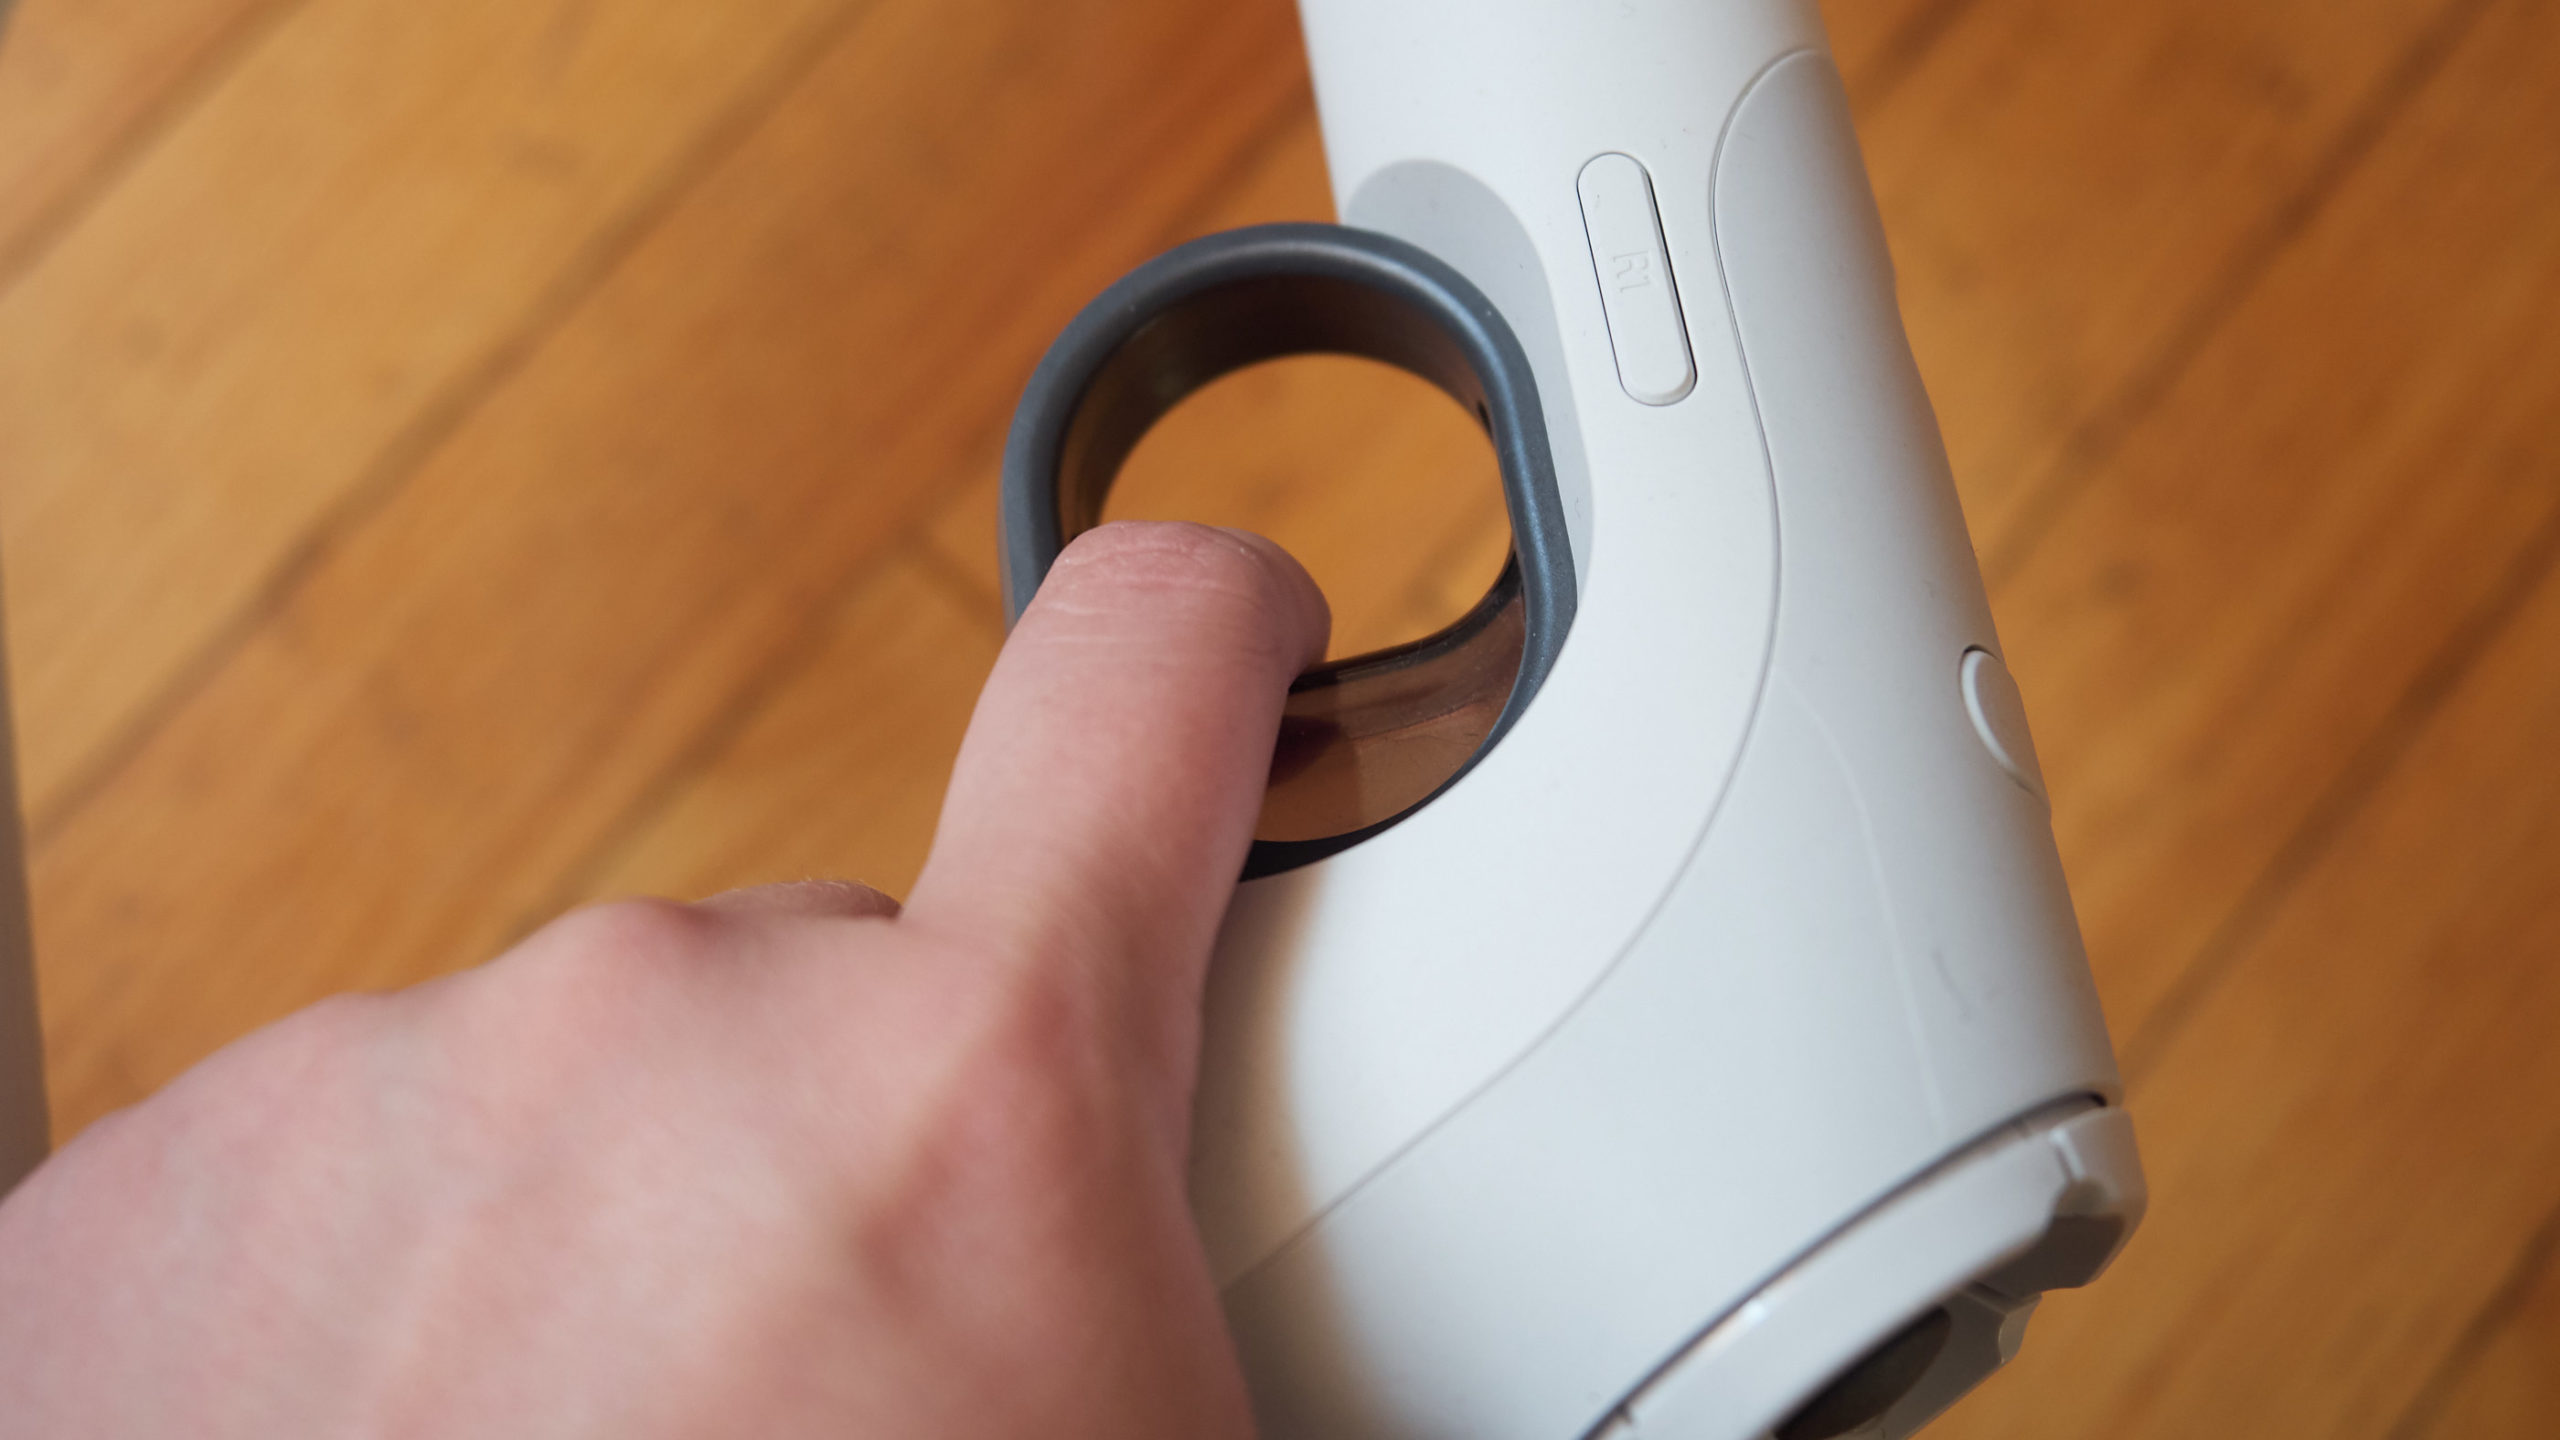 PlayStation VR Aim Controller: The Gizmodo Review